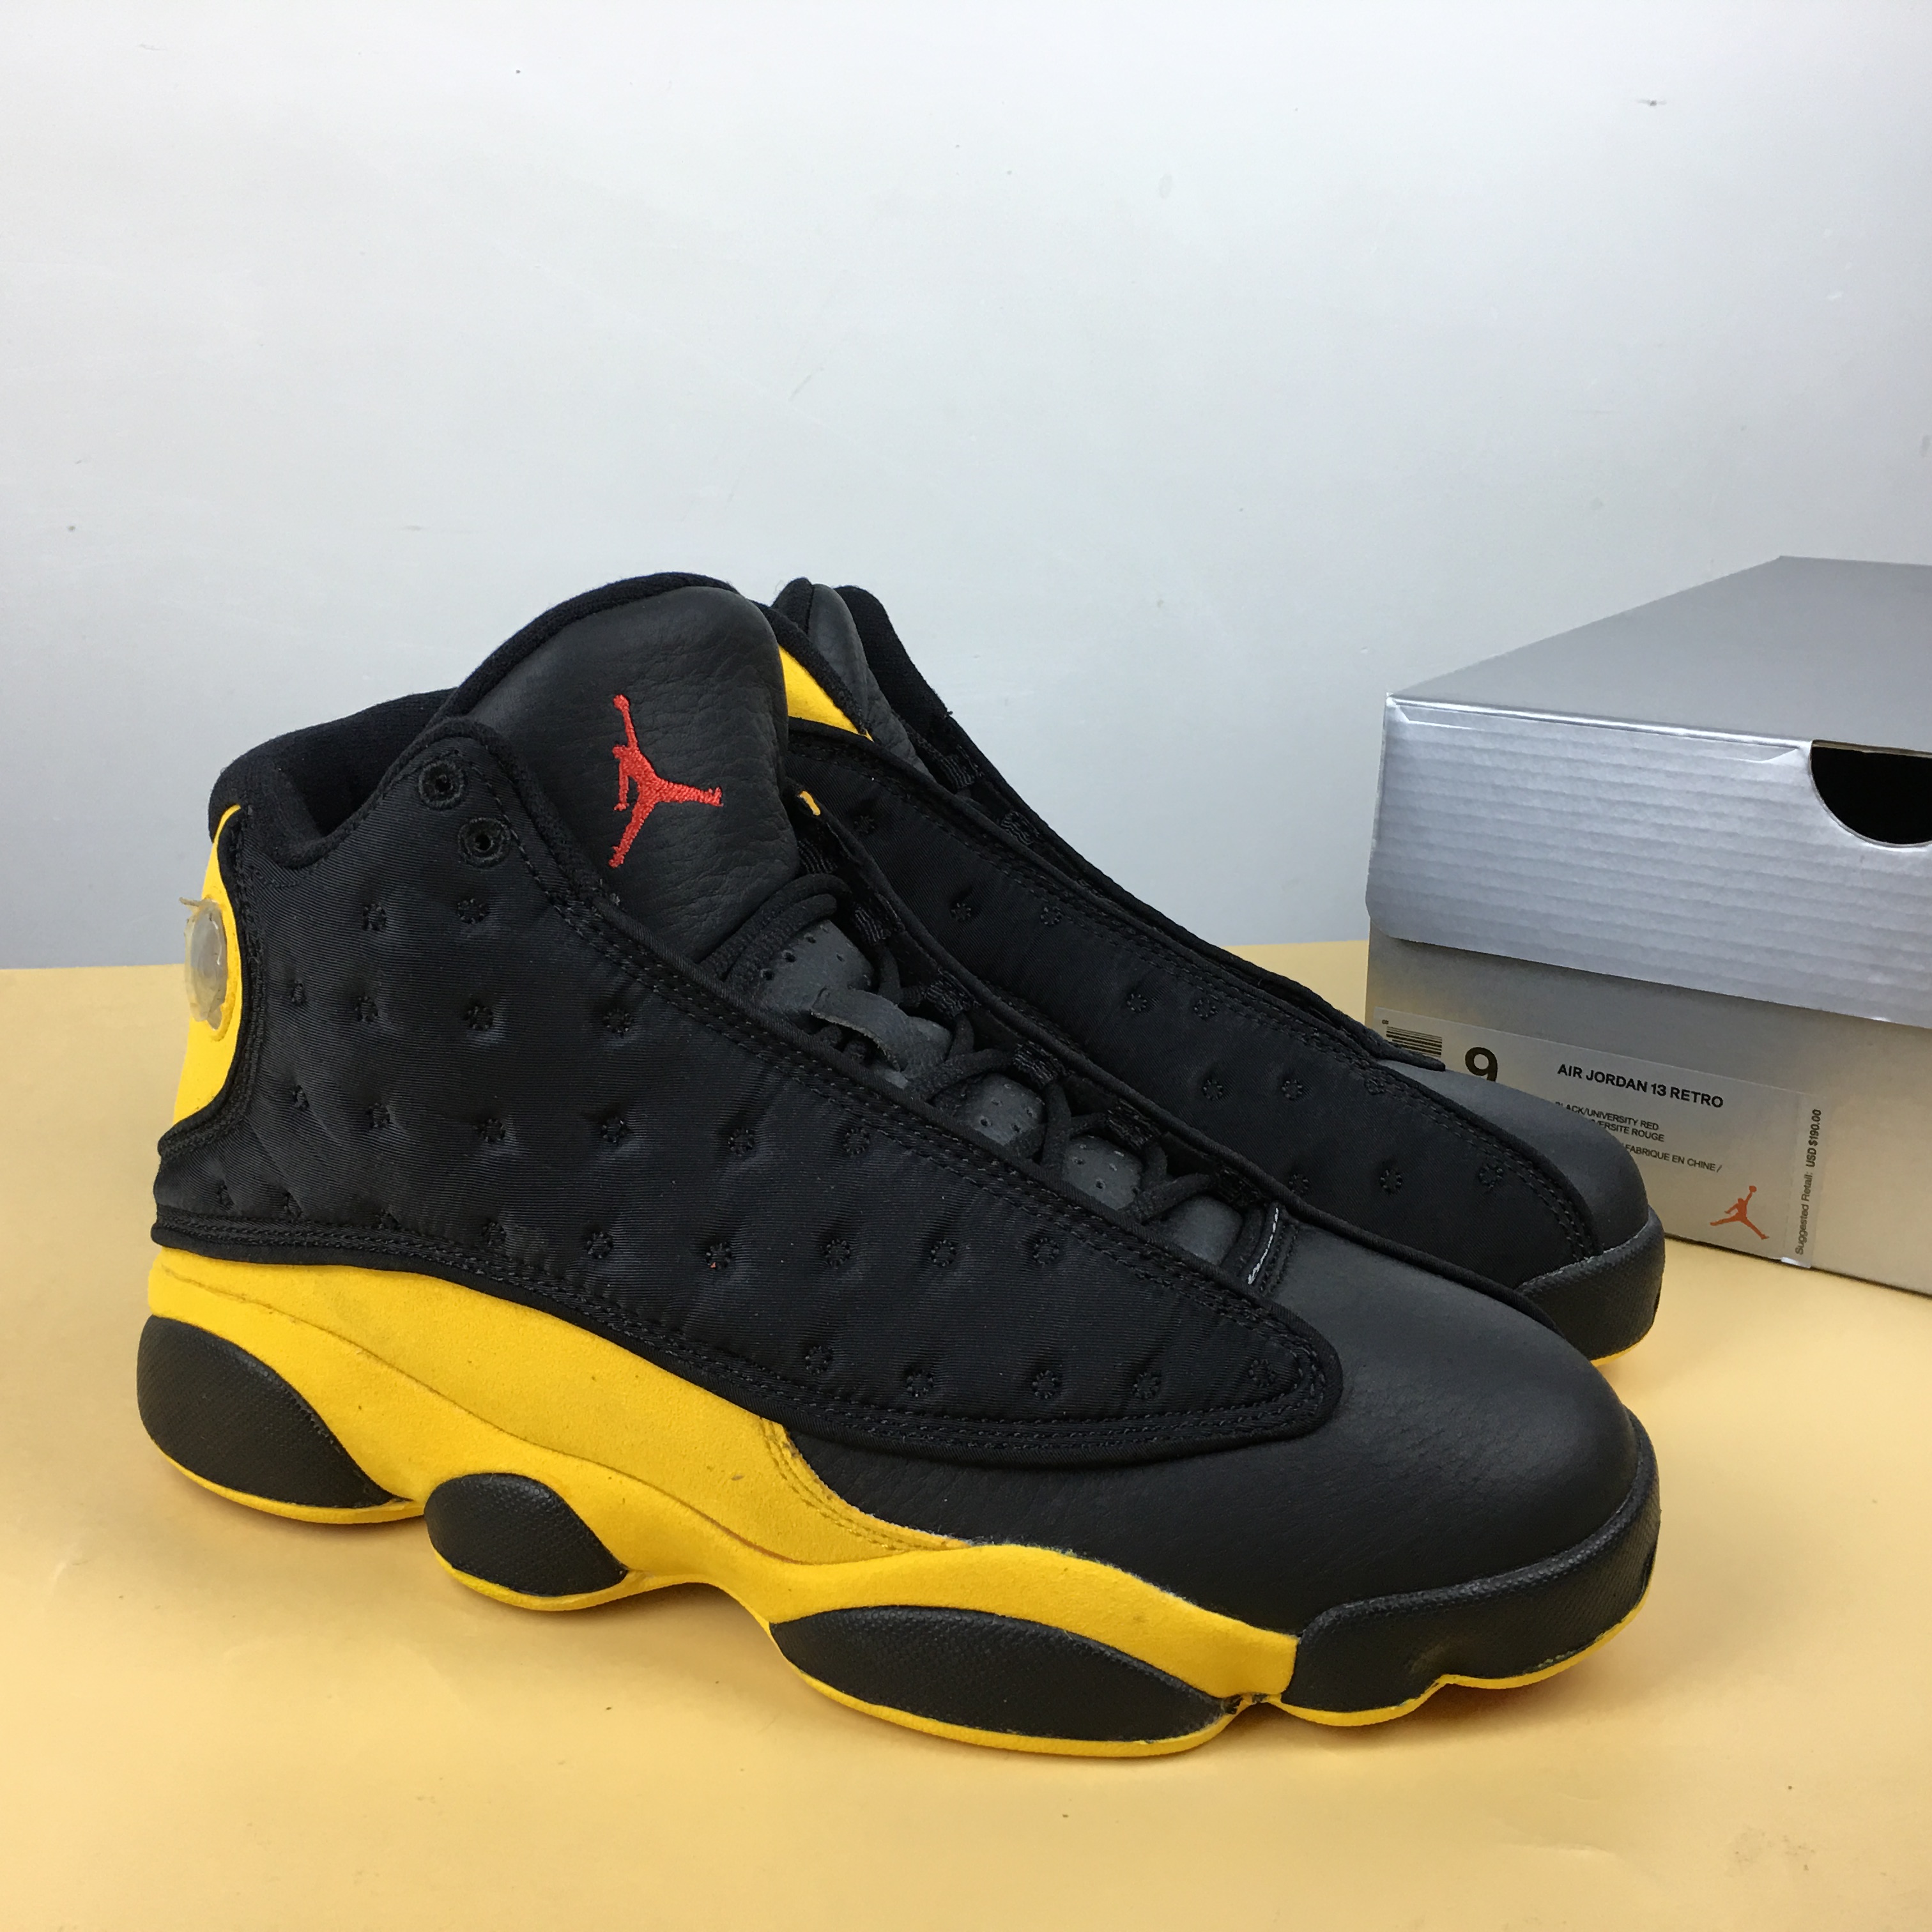 Air Jordan 13 Melo Class of 2003 Black Yellow Red Shoes